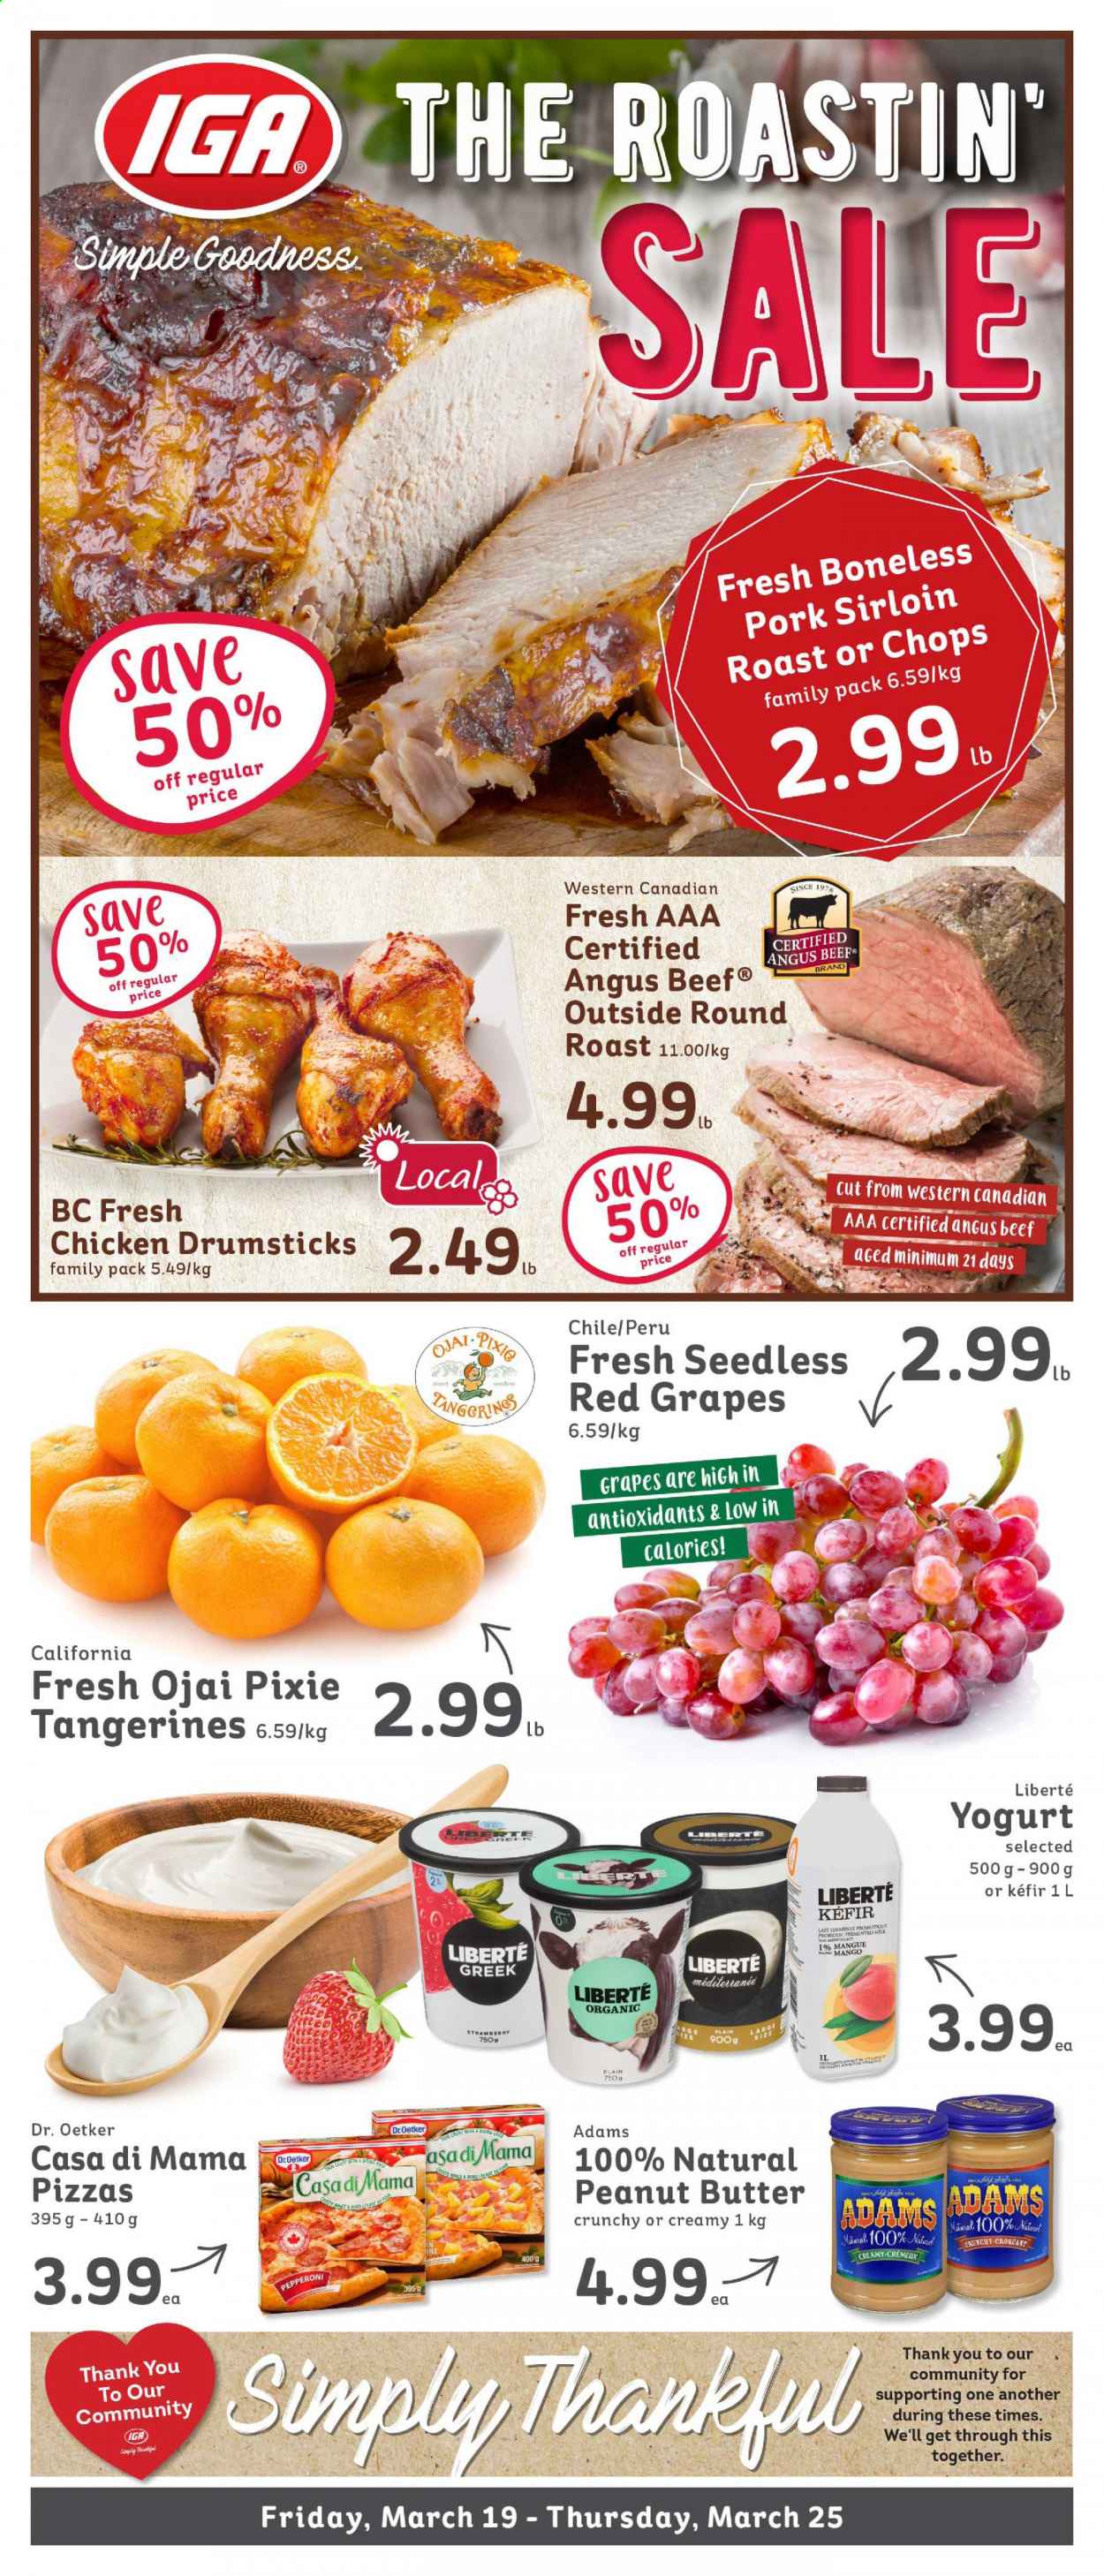 thumbnail - IGA Simple Goodness Flyer - March 19, 2021 - March 25, 2021 - Sales products - grapes, tangerines, pizza, pepperoni, Dr. Oetker, yoghurt, milk, kefir, peanut butter, chicken drumsticks, chicken, beef meat, round roast, pork loin. Page 1.